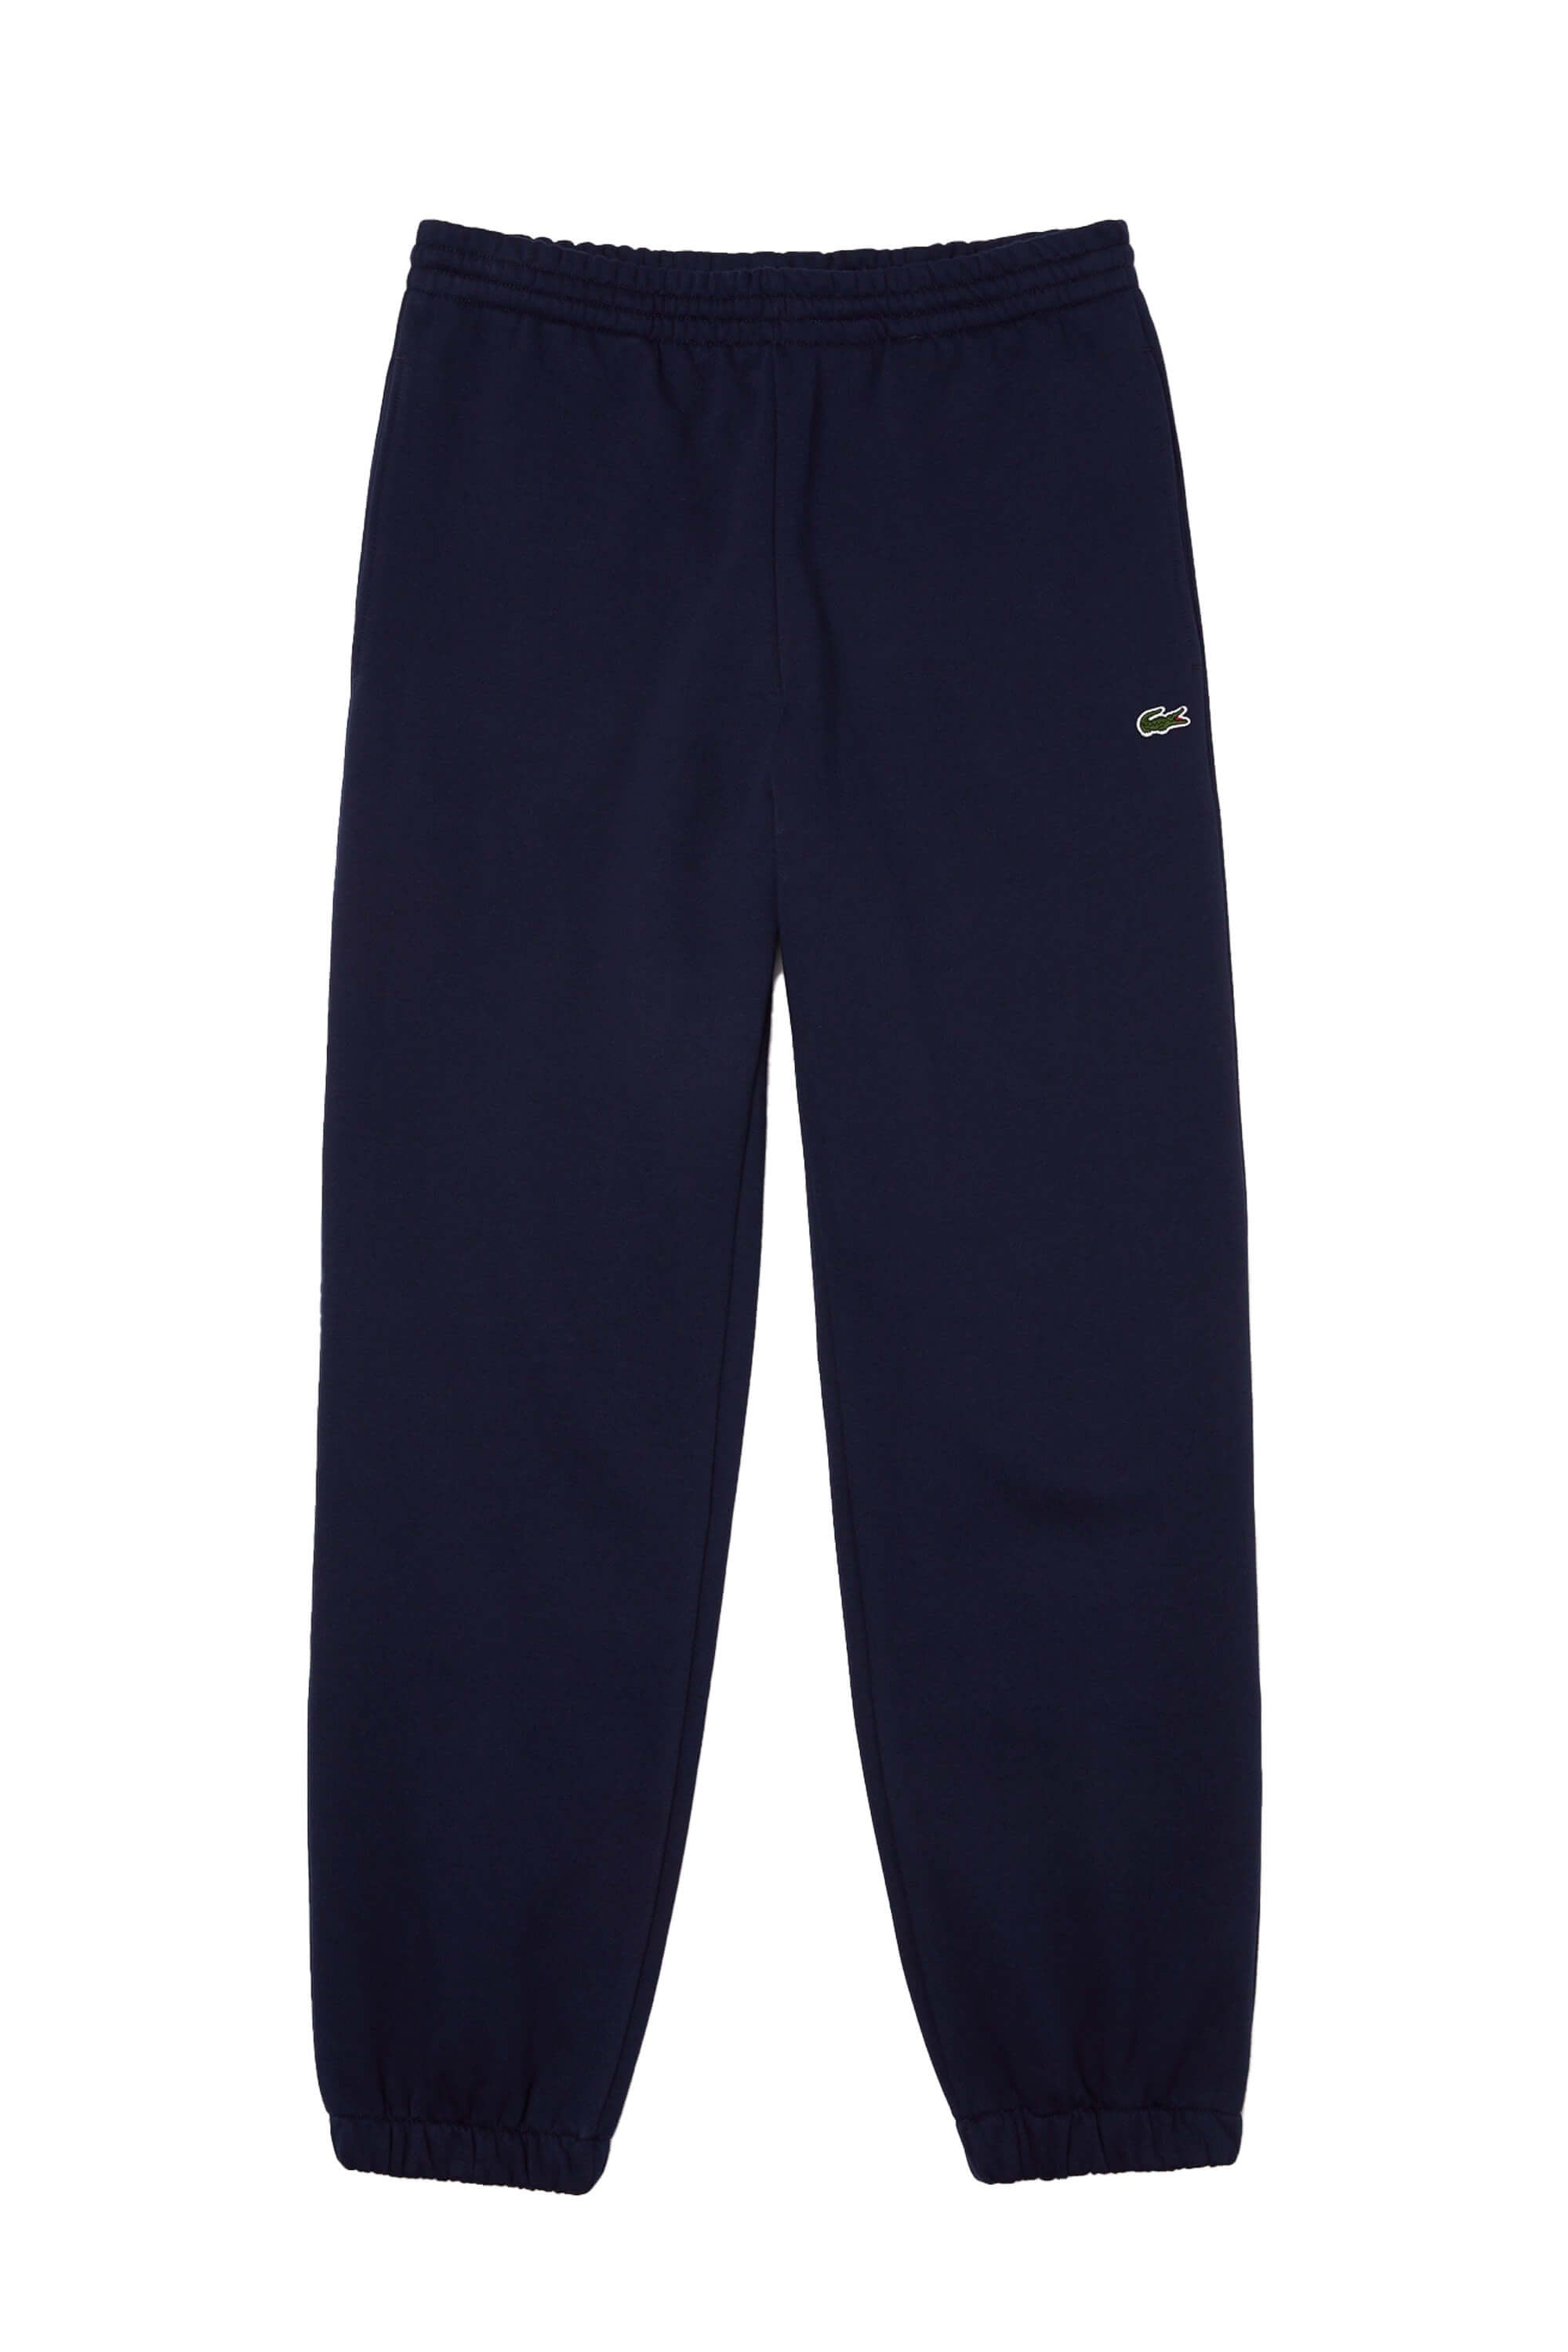 Lacoste Tracksuit Trousers Navy